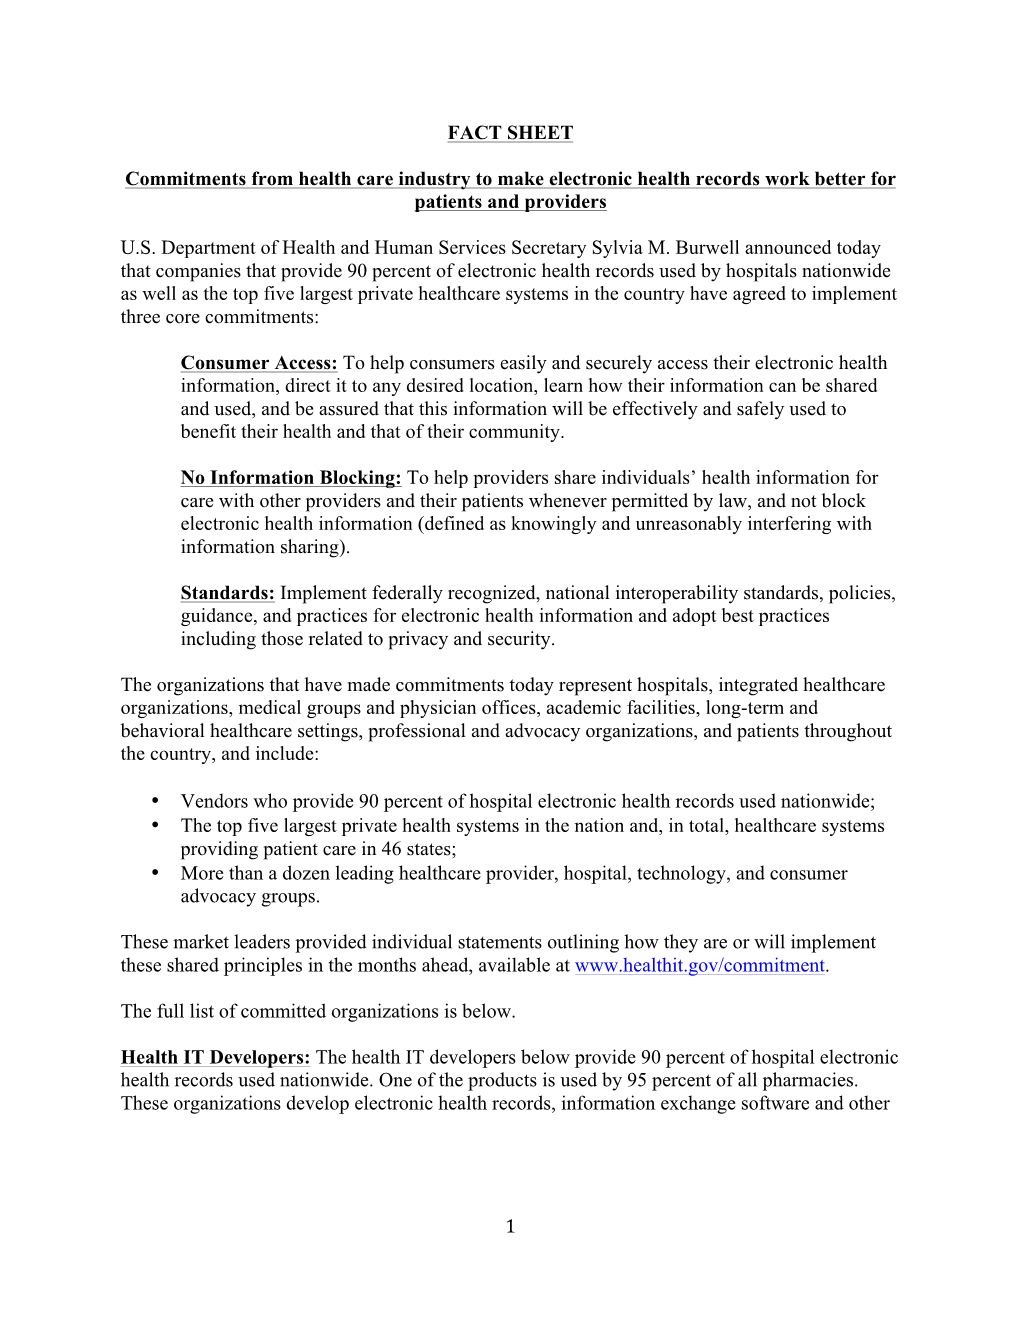 1 FACT SHEET Commitments from Health Care Industry to Make